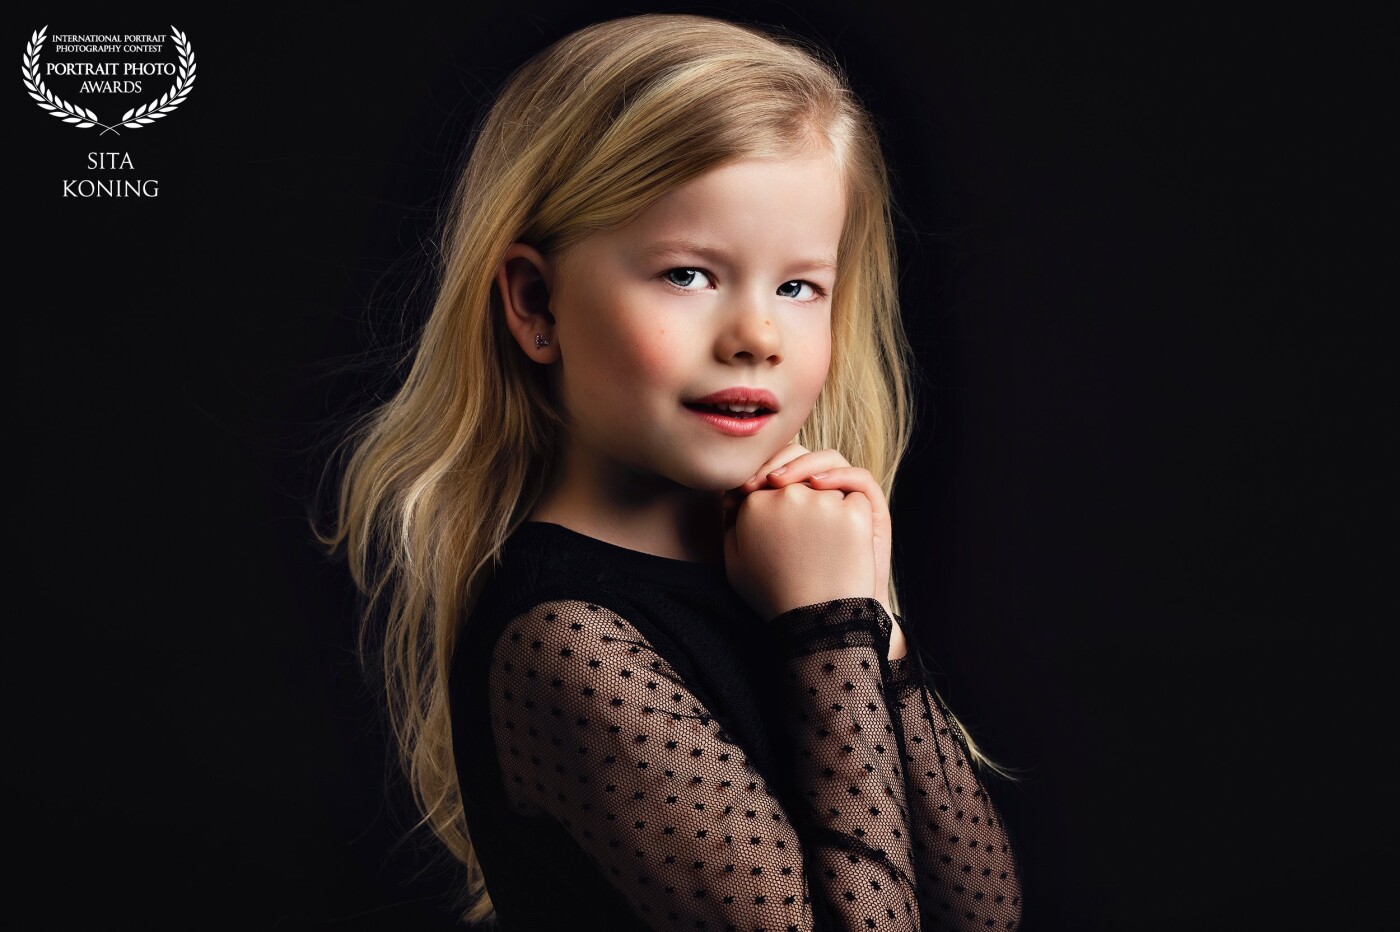 This beauty came to my photostudio with het little sister! So cute! I love the look in her  eyes! So pure and serene with the black background